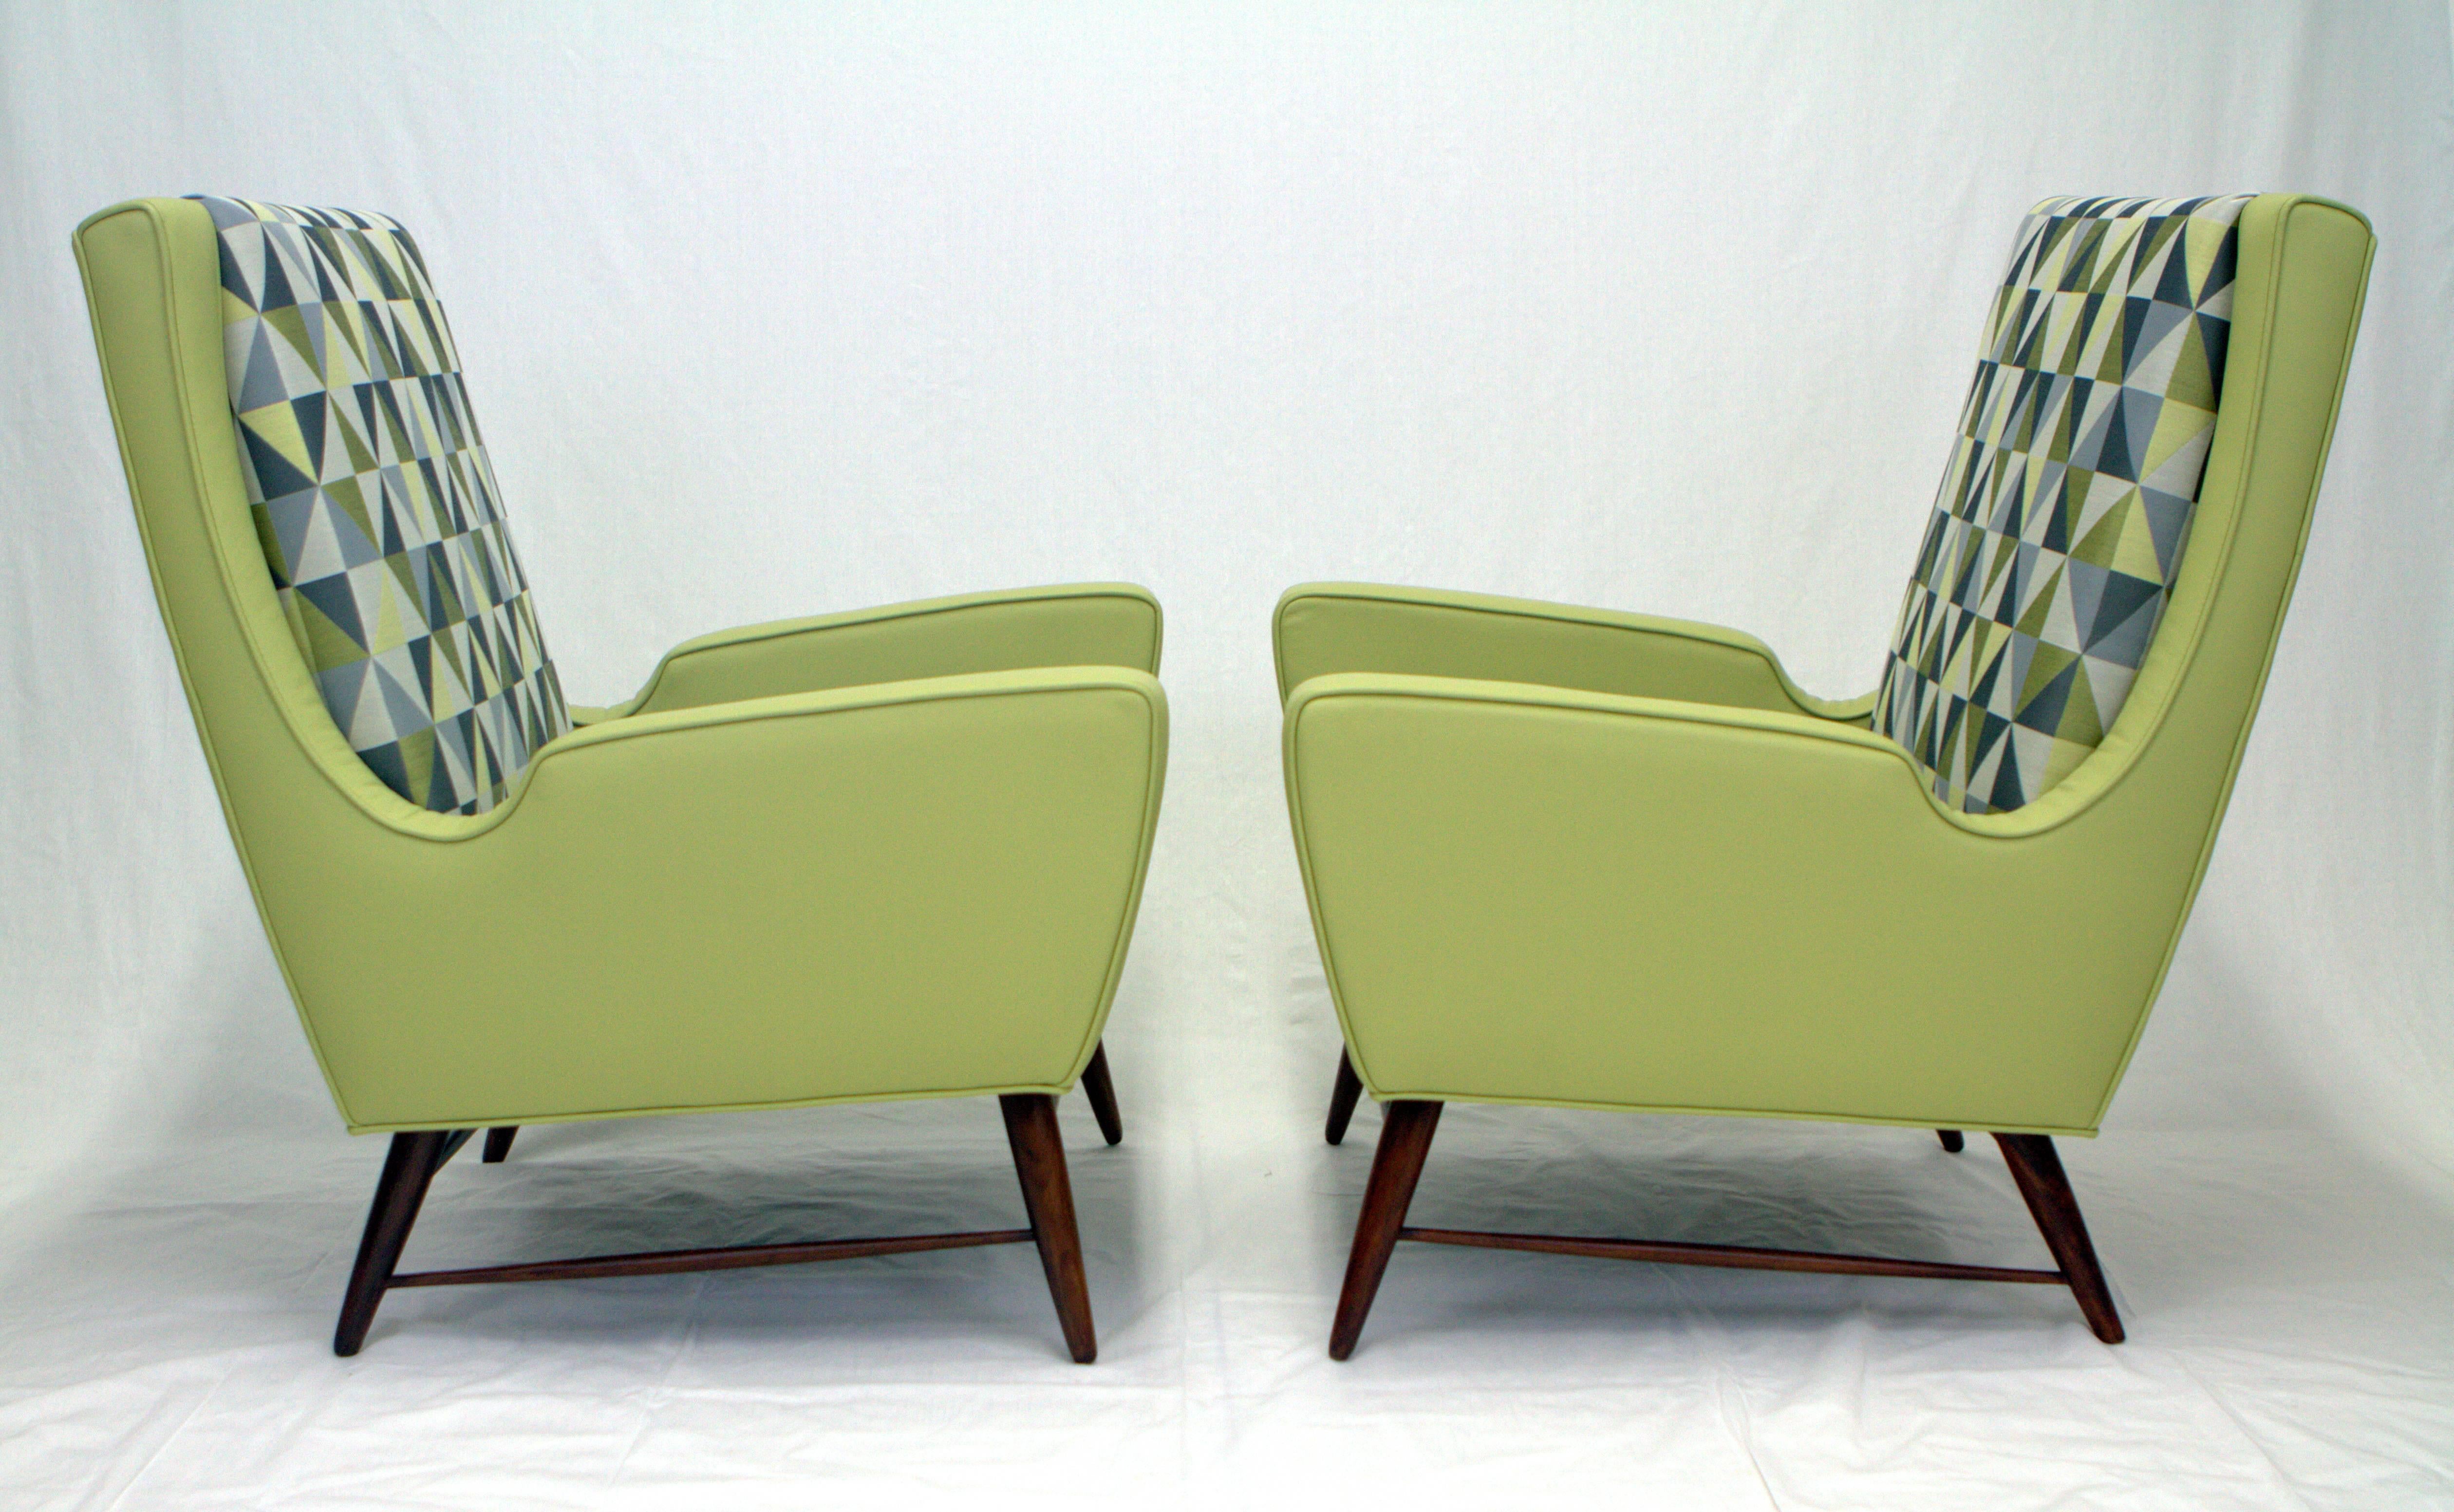 Fantastic pair of Italian lounge chairs upholstered in Ponti style diamante fabric and leather. Expressive forms give these chairs an exciting presence and shape resting on walnut doweled legs with delicate stretchers.